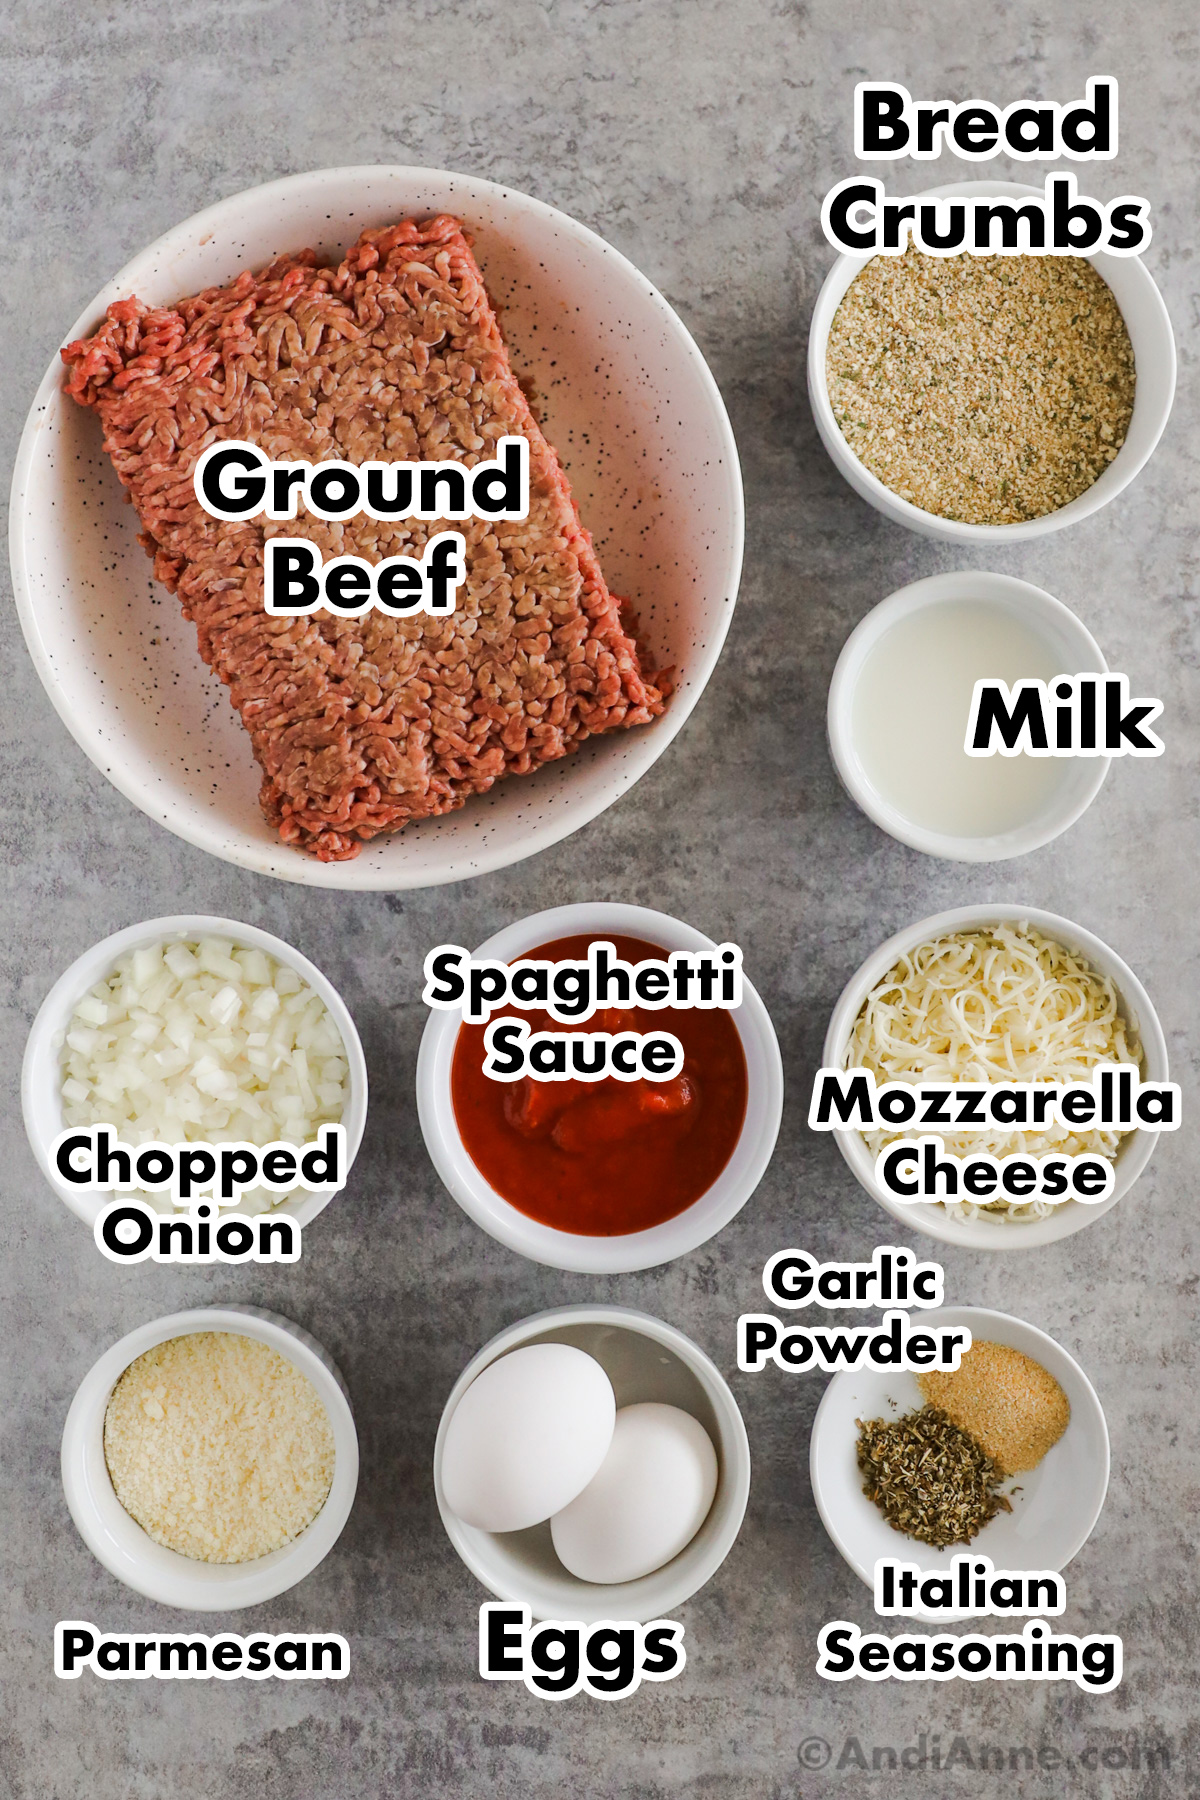 Recipe ingredients on the counter including raw ground beef, bowls of bread crumbs, milk, mozzarella cheese, spaghetti sauce, chopped onion, parmesan and eggs.